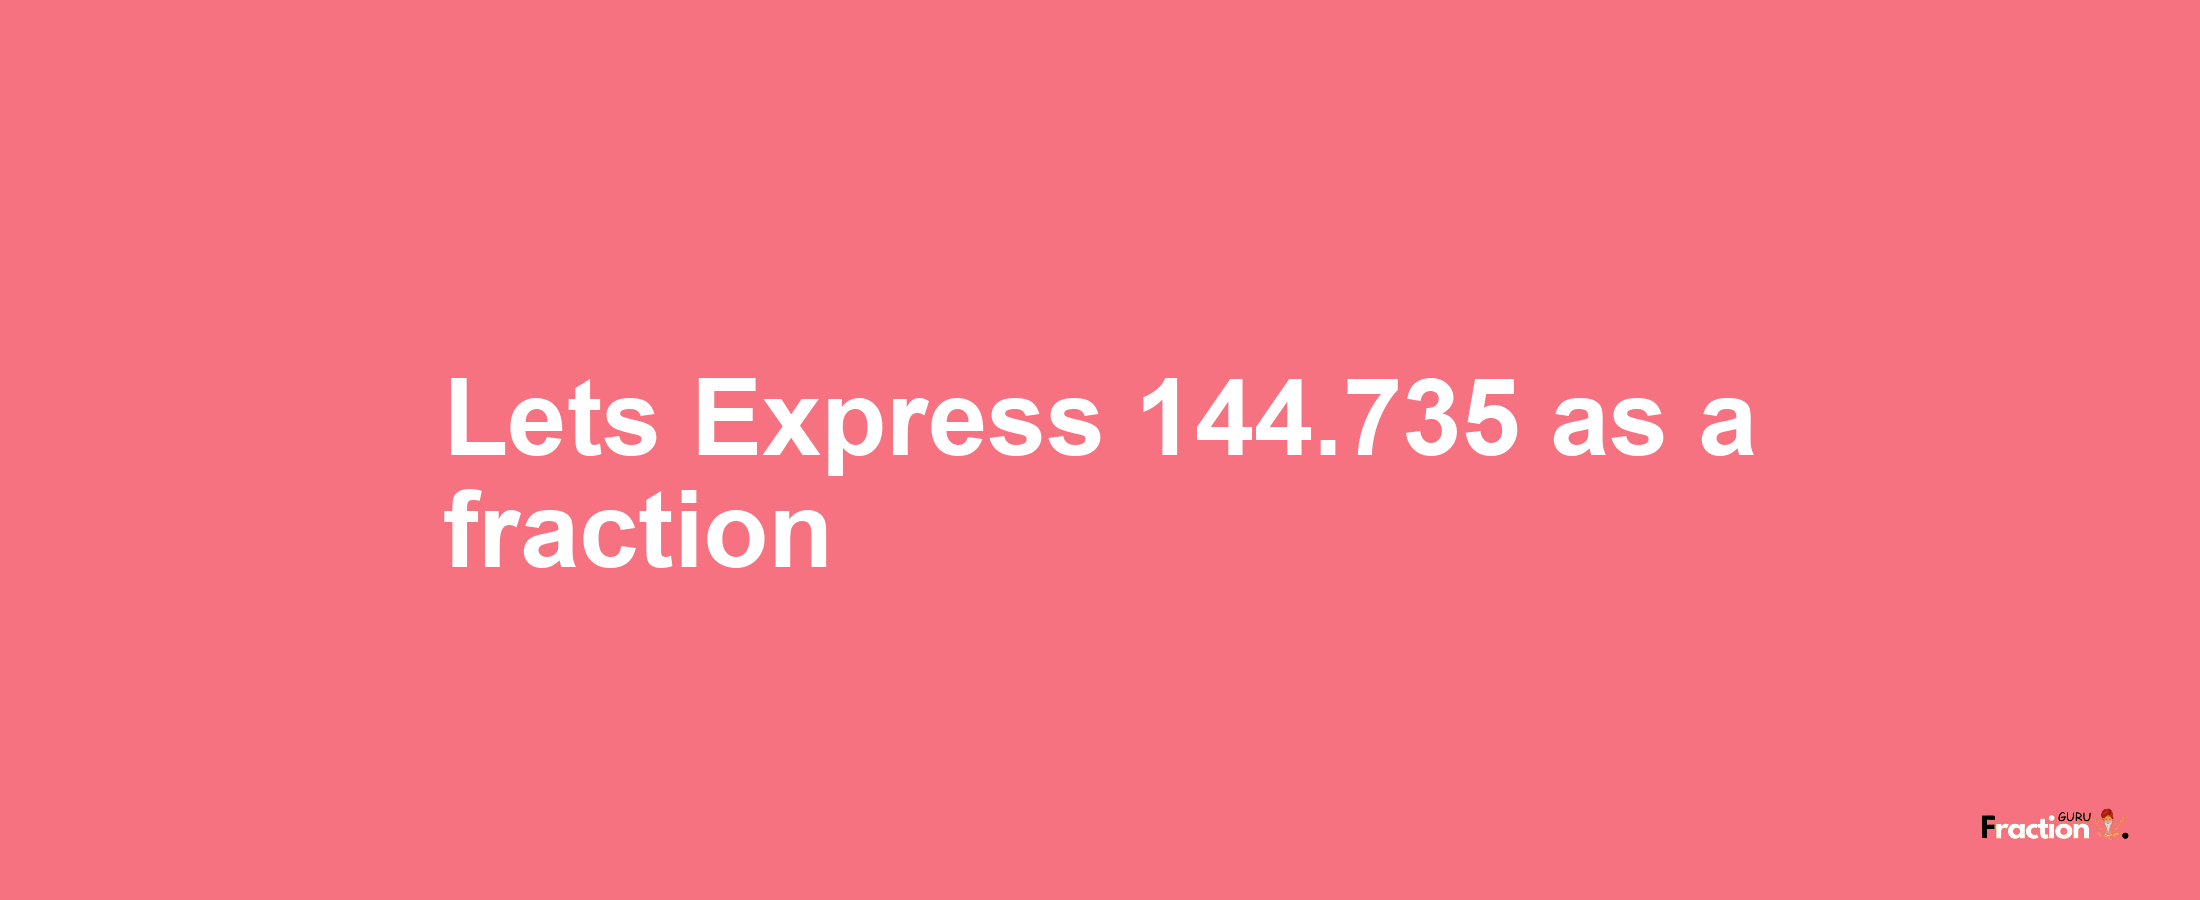 Lets Express 144.735 as afraction